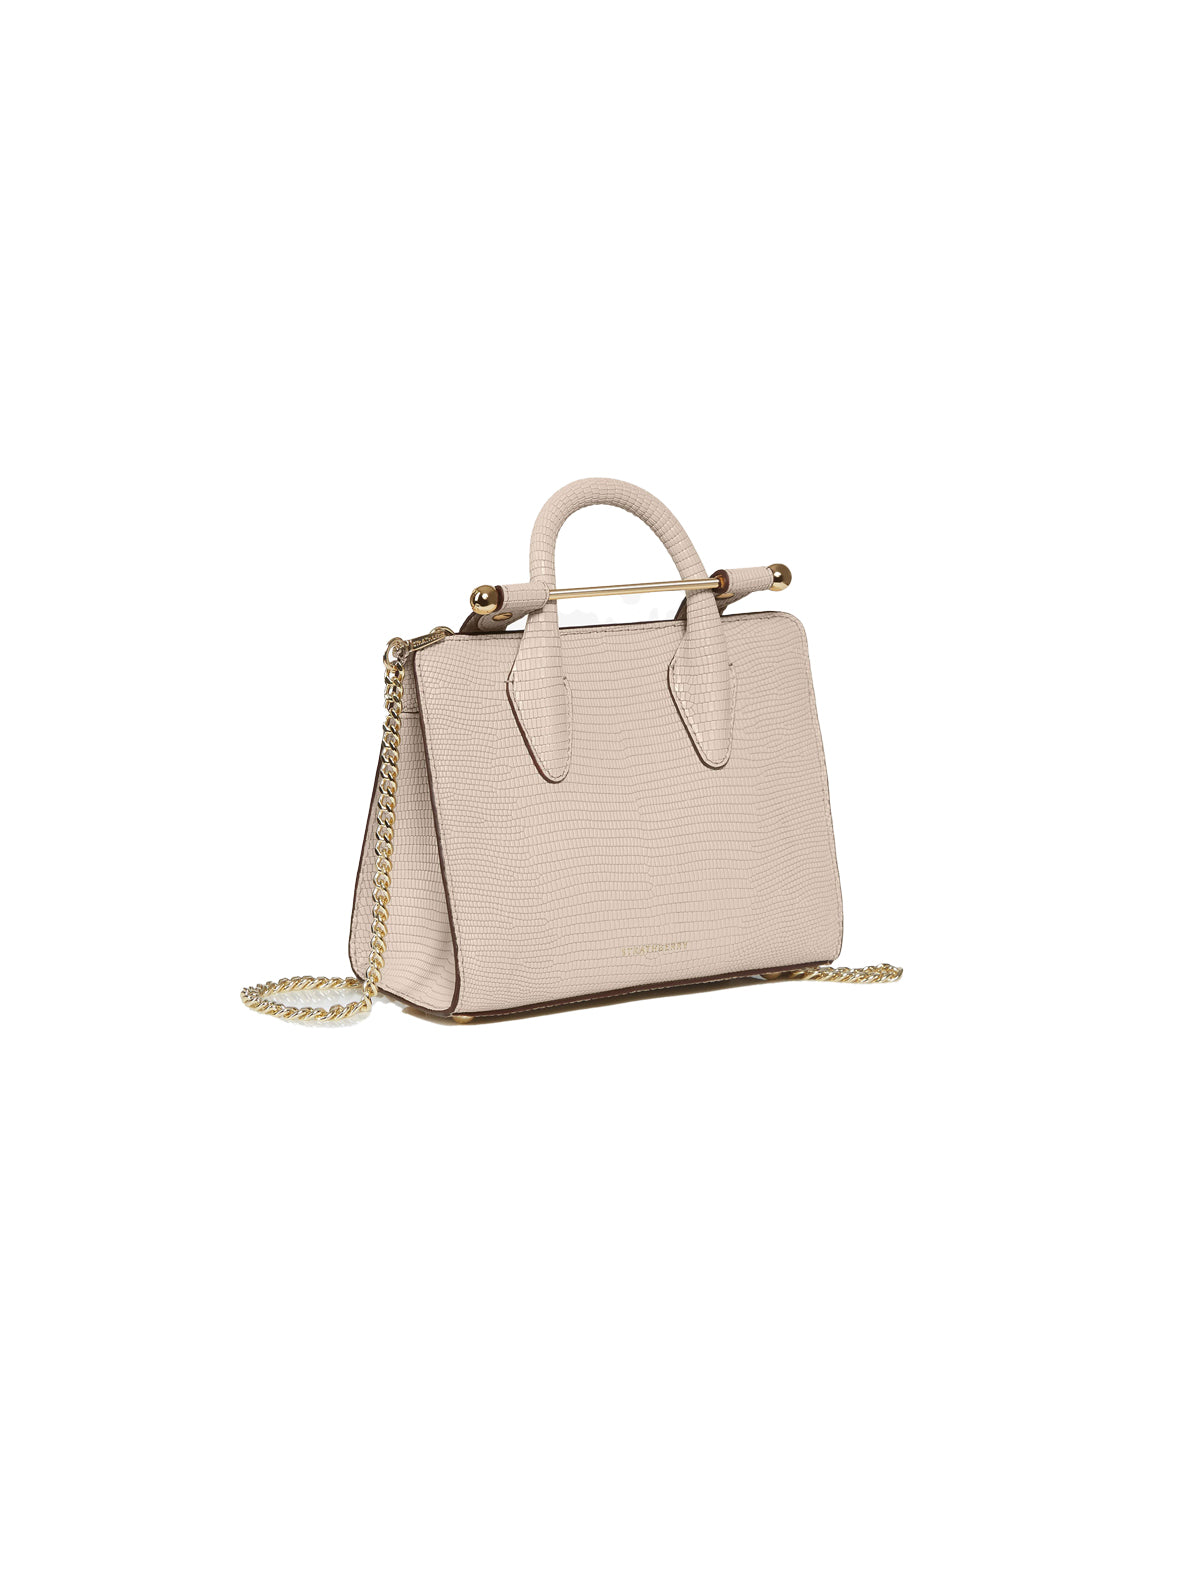 STRATHBERRY Nano Tote Bag in Lizard-Embossed Leather Oat